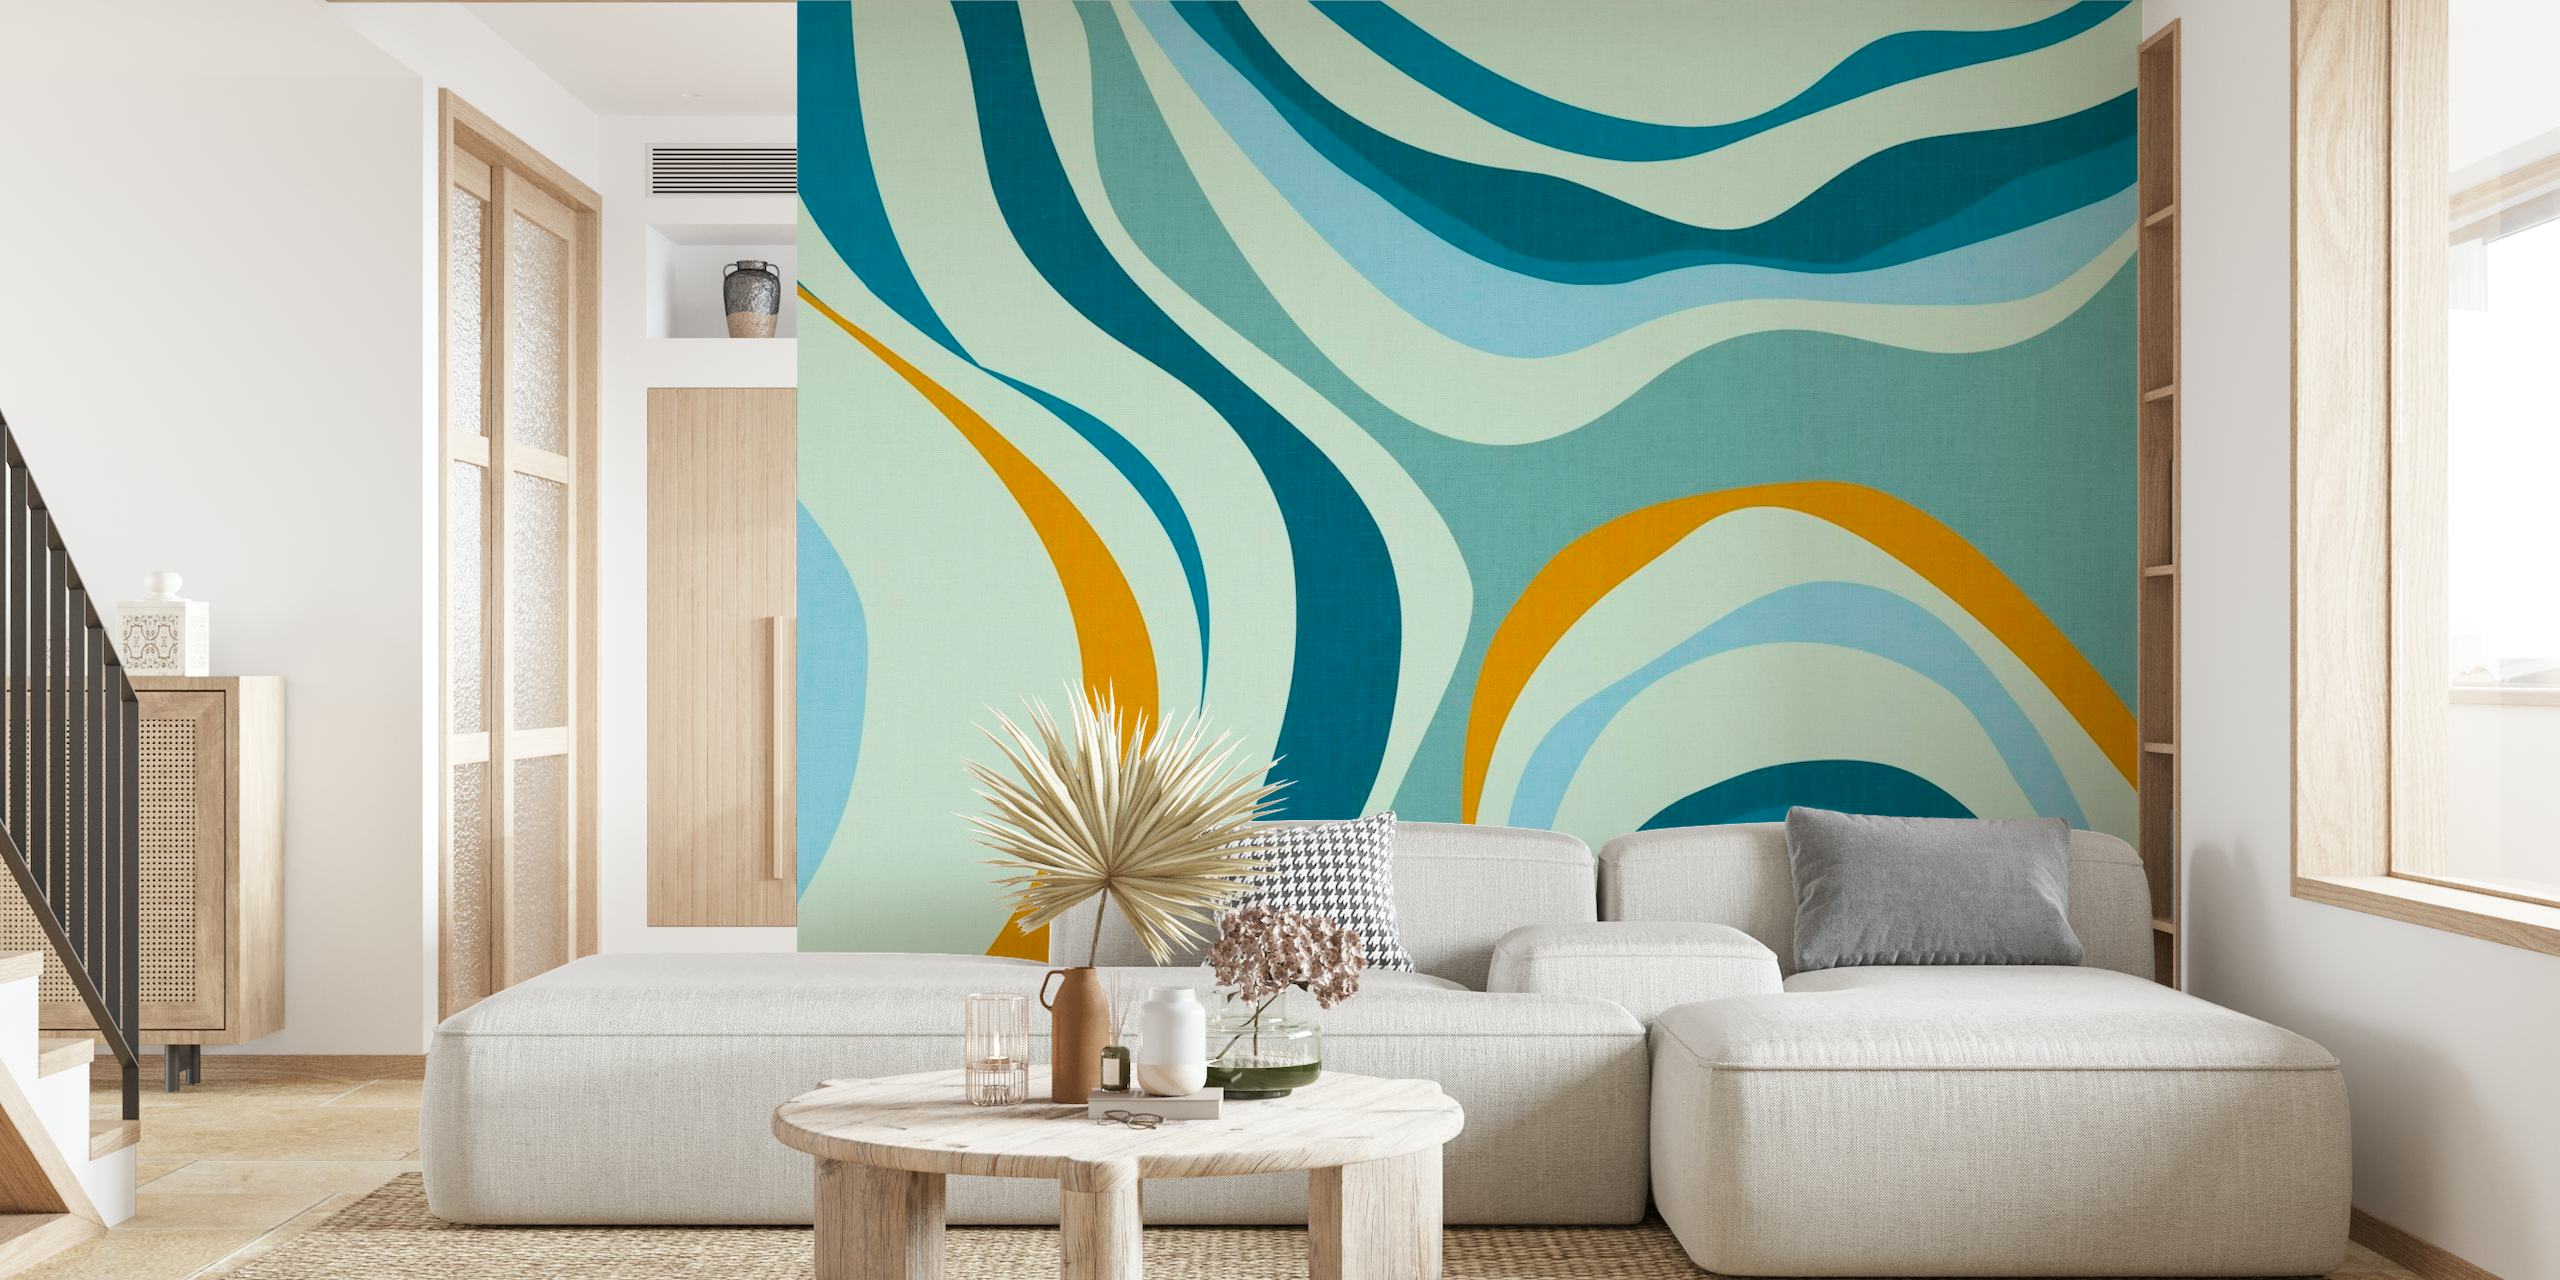 Retro-style blue waves wall mural with serene blue and sandy color patterns